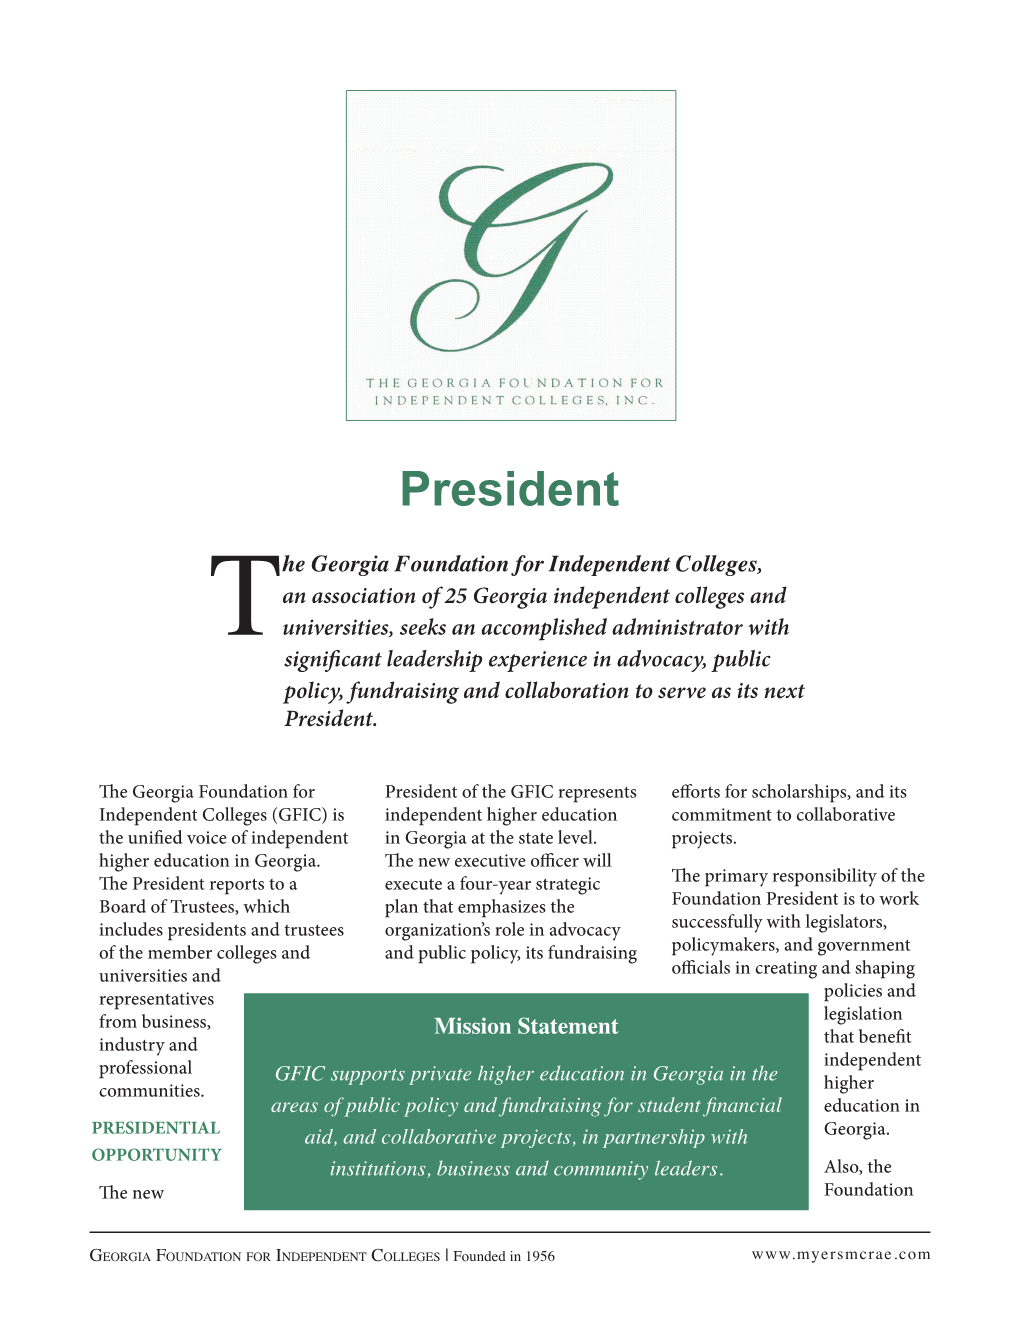 President the Georgia Foundation for Independent Colleges